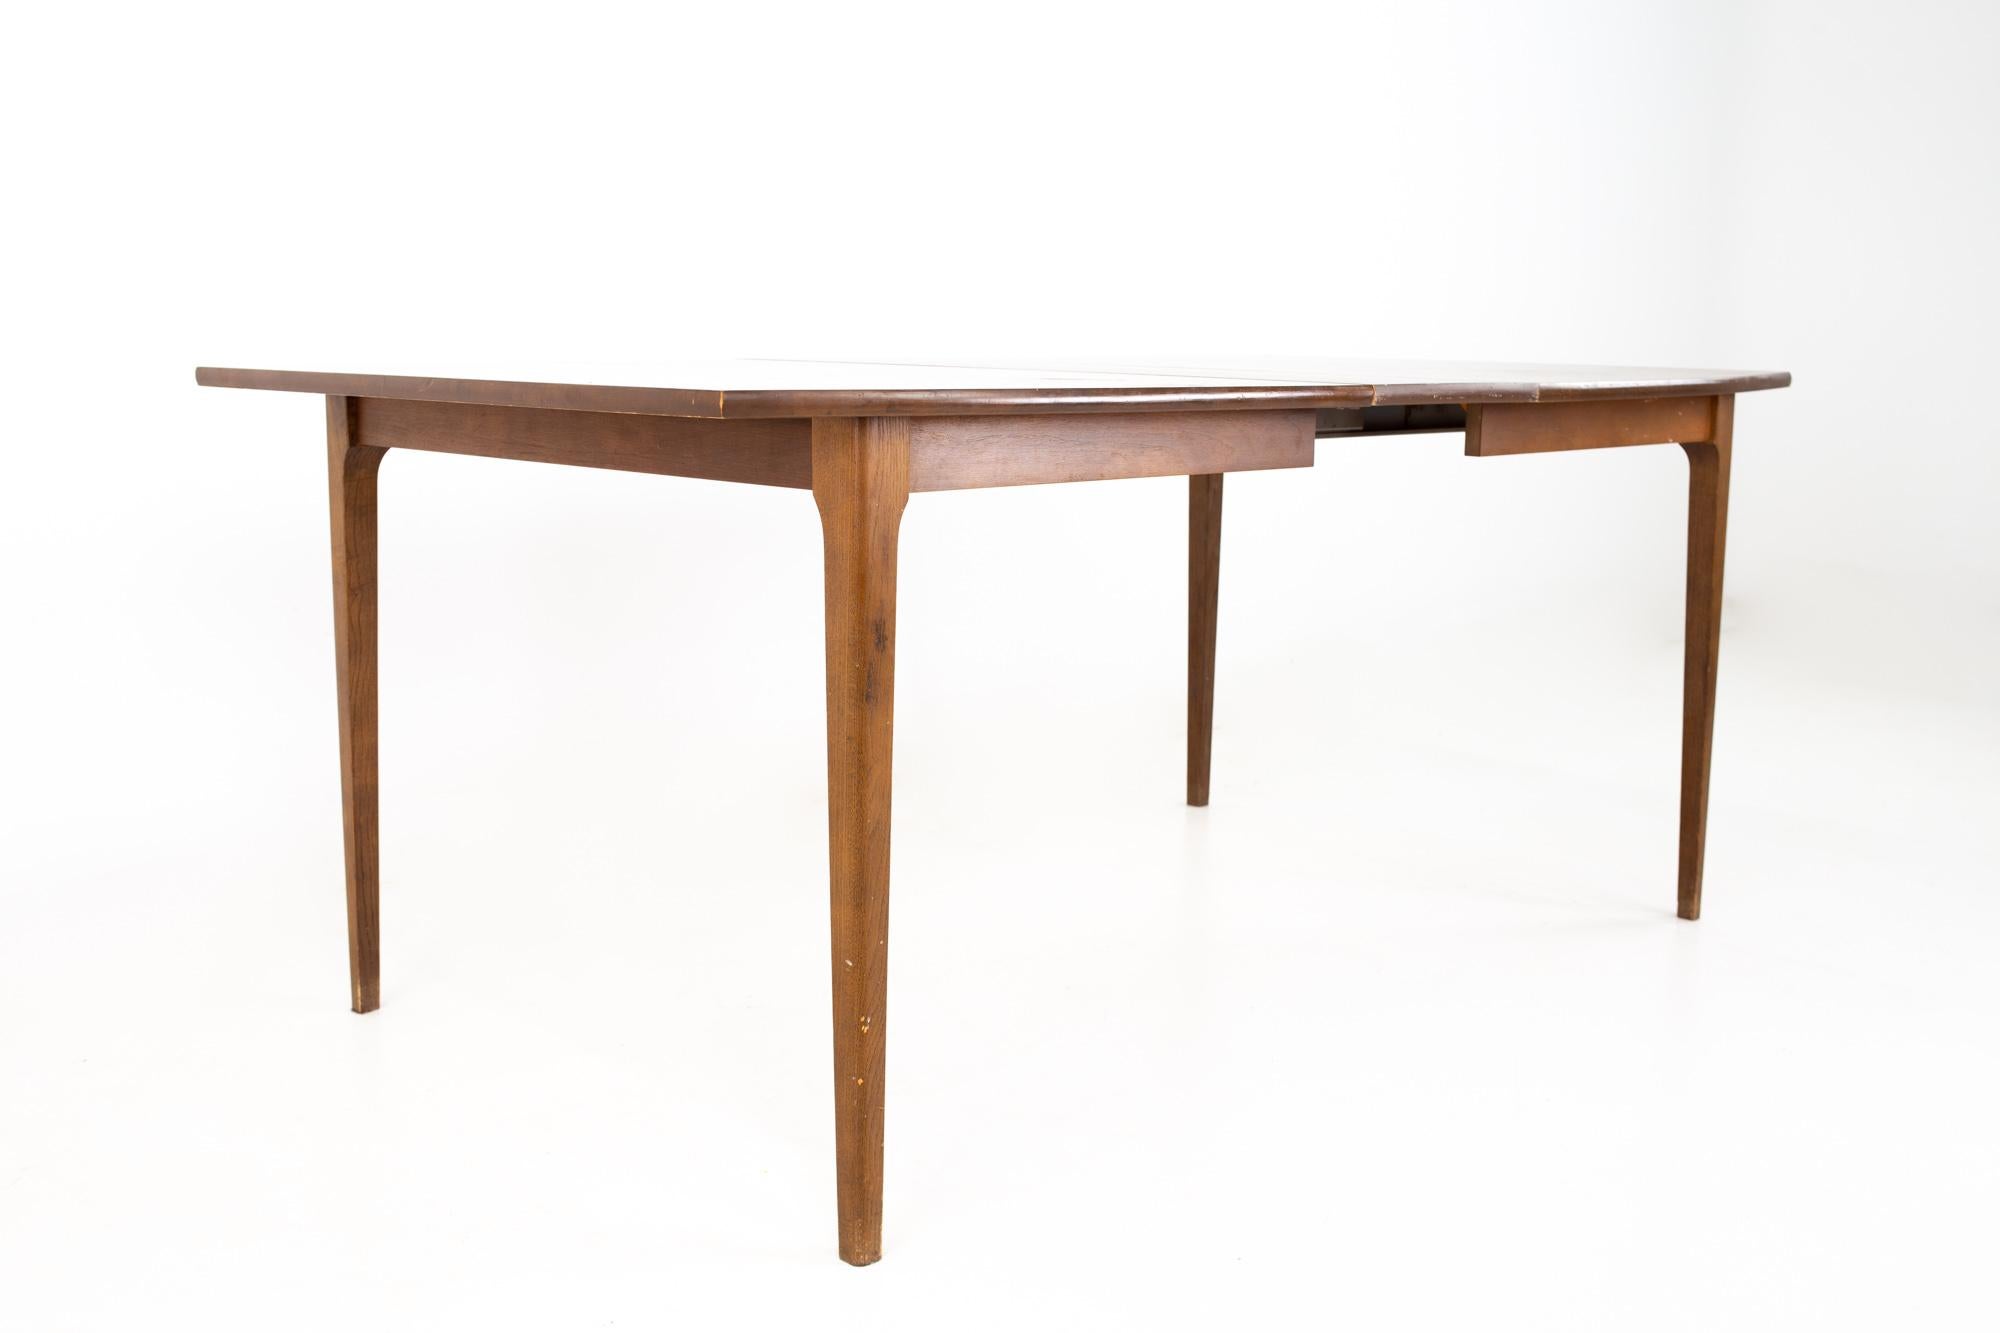 Late 20th Century Brasilia Style Mid Century Walnut Surfboard Dining Table with 2 Leaves